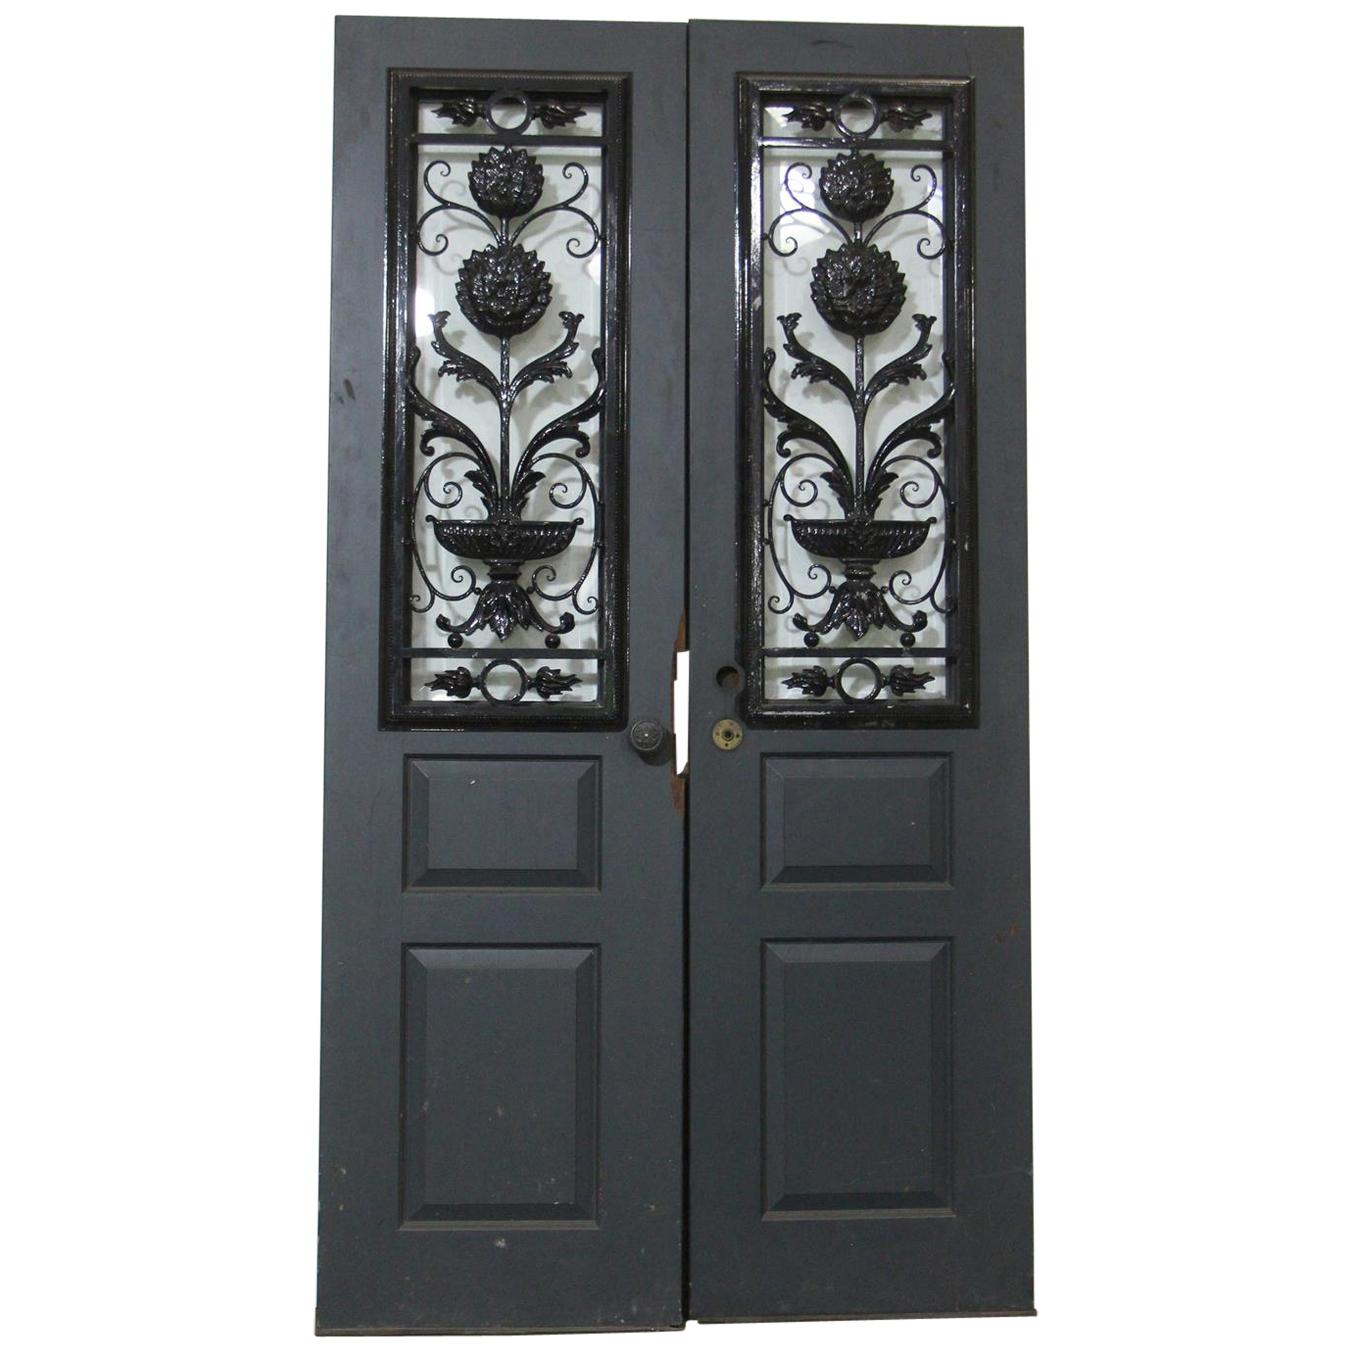 1940s Pair of Doors with Beveled Glass and New Wrought Iron Window Guards